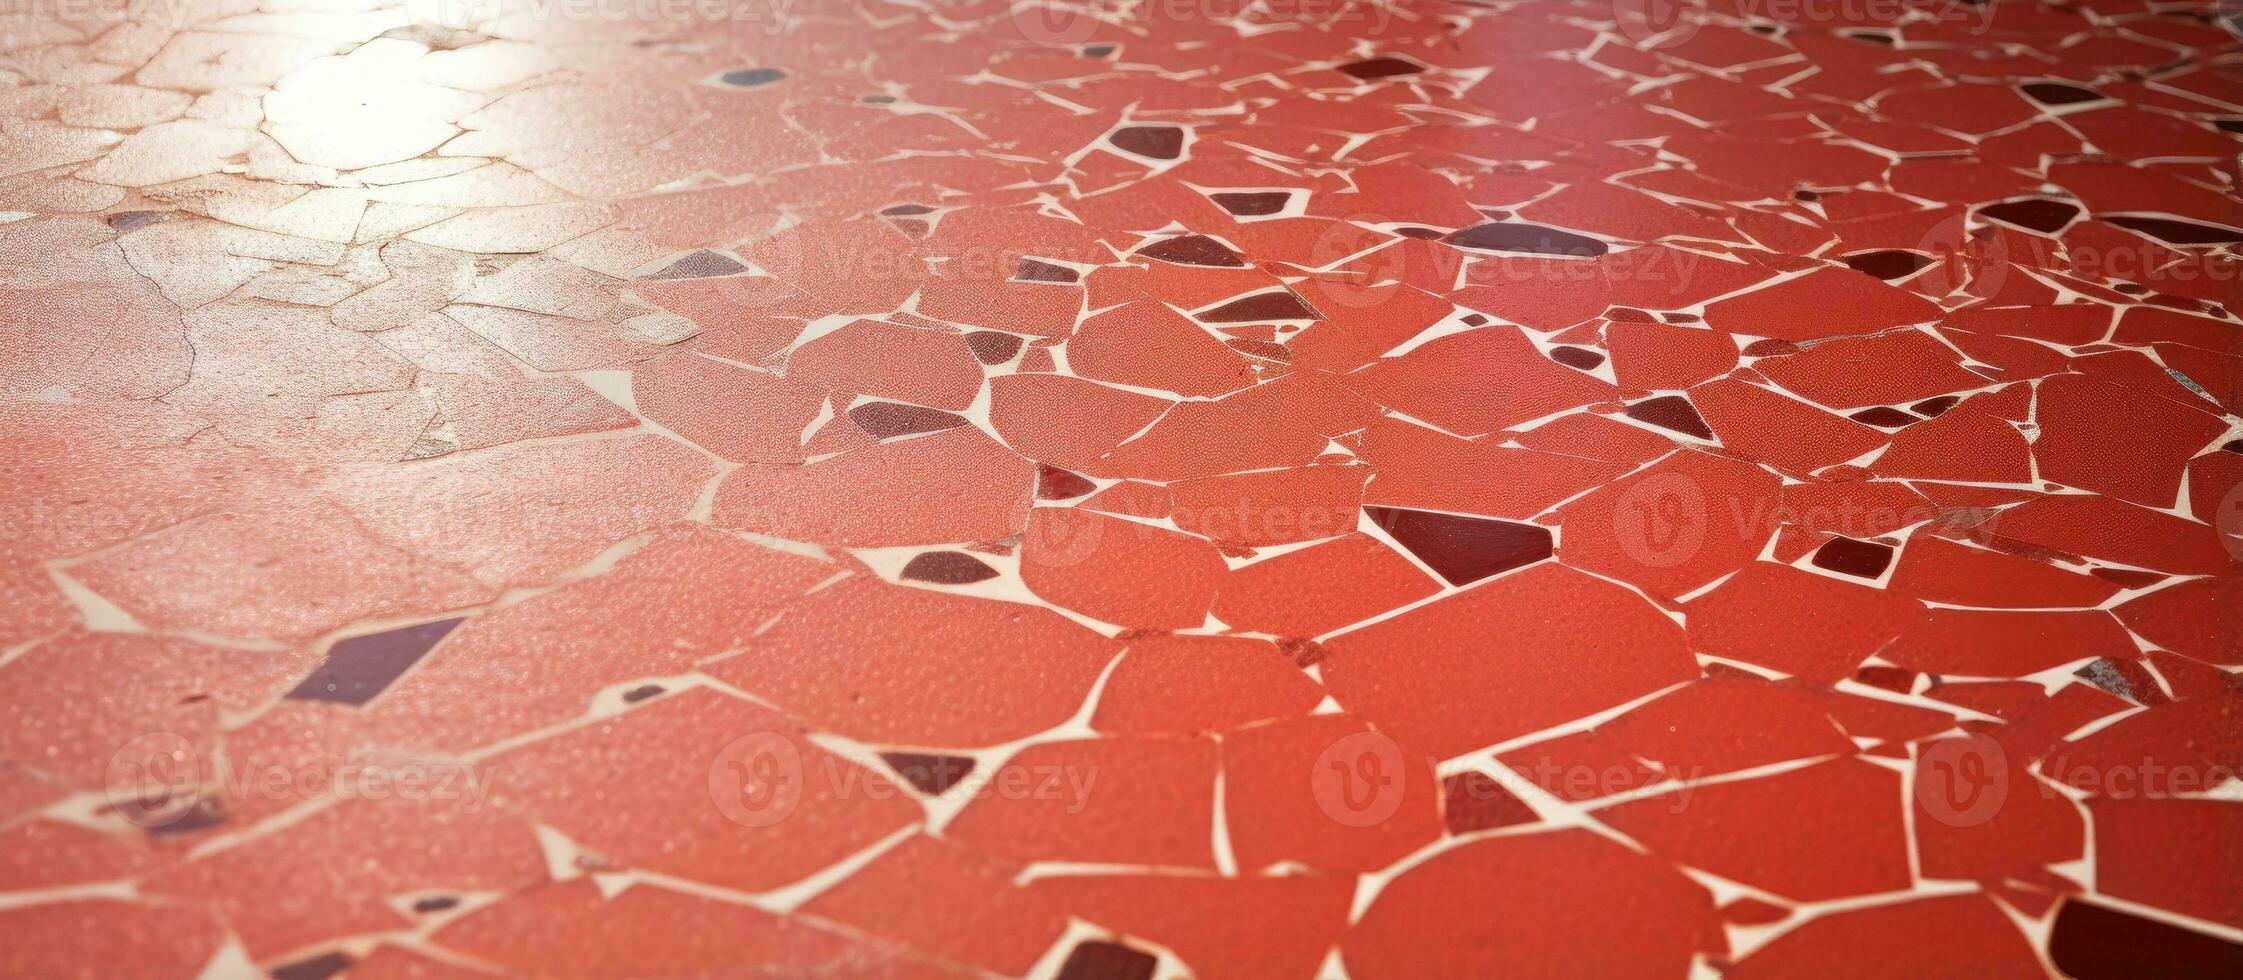 Many scratches are on the old red terrazzo floor photo